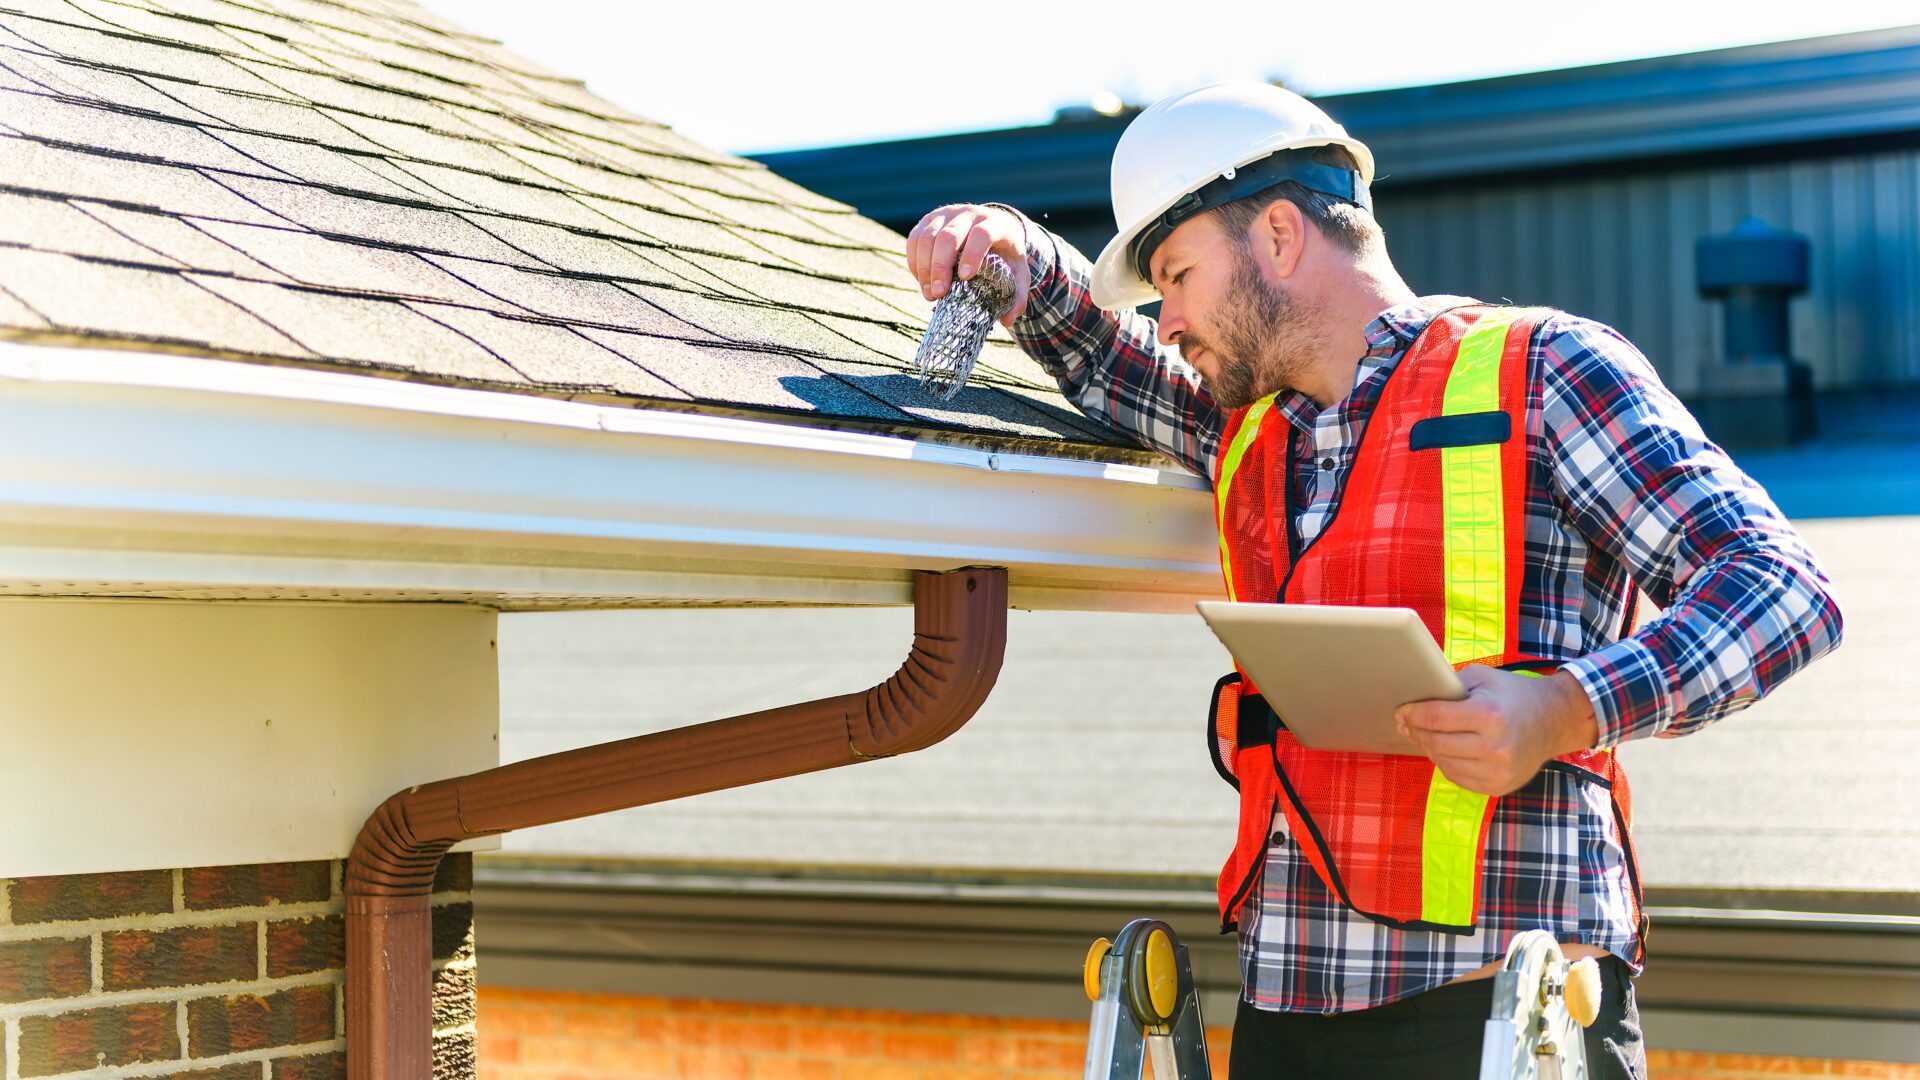 A roofer with a hardhat on inspects the downspout of a gutter system